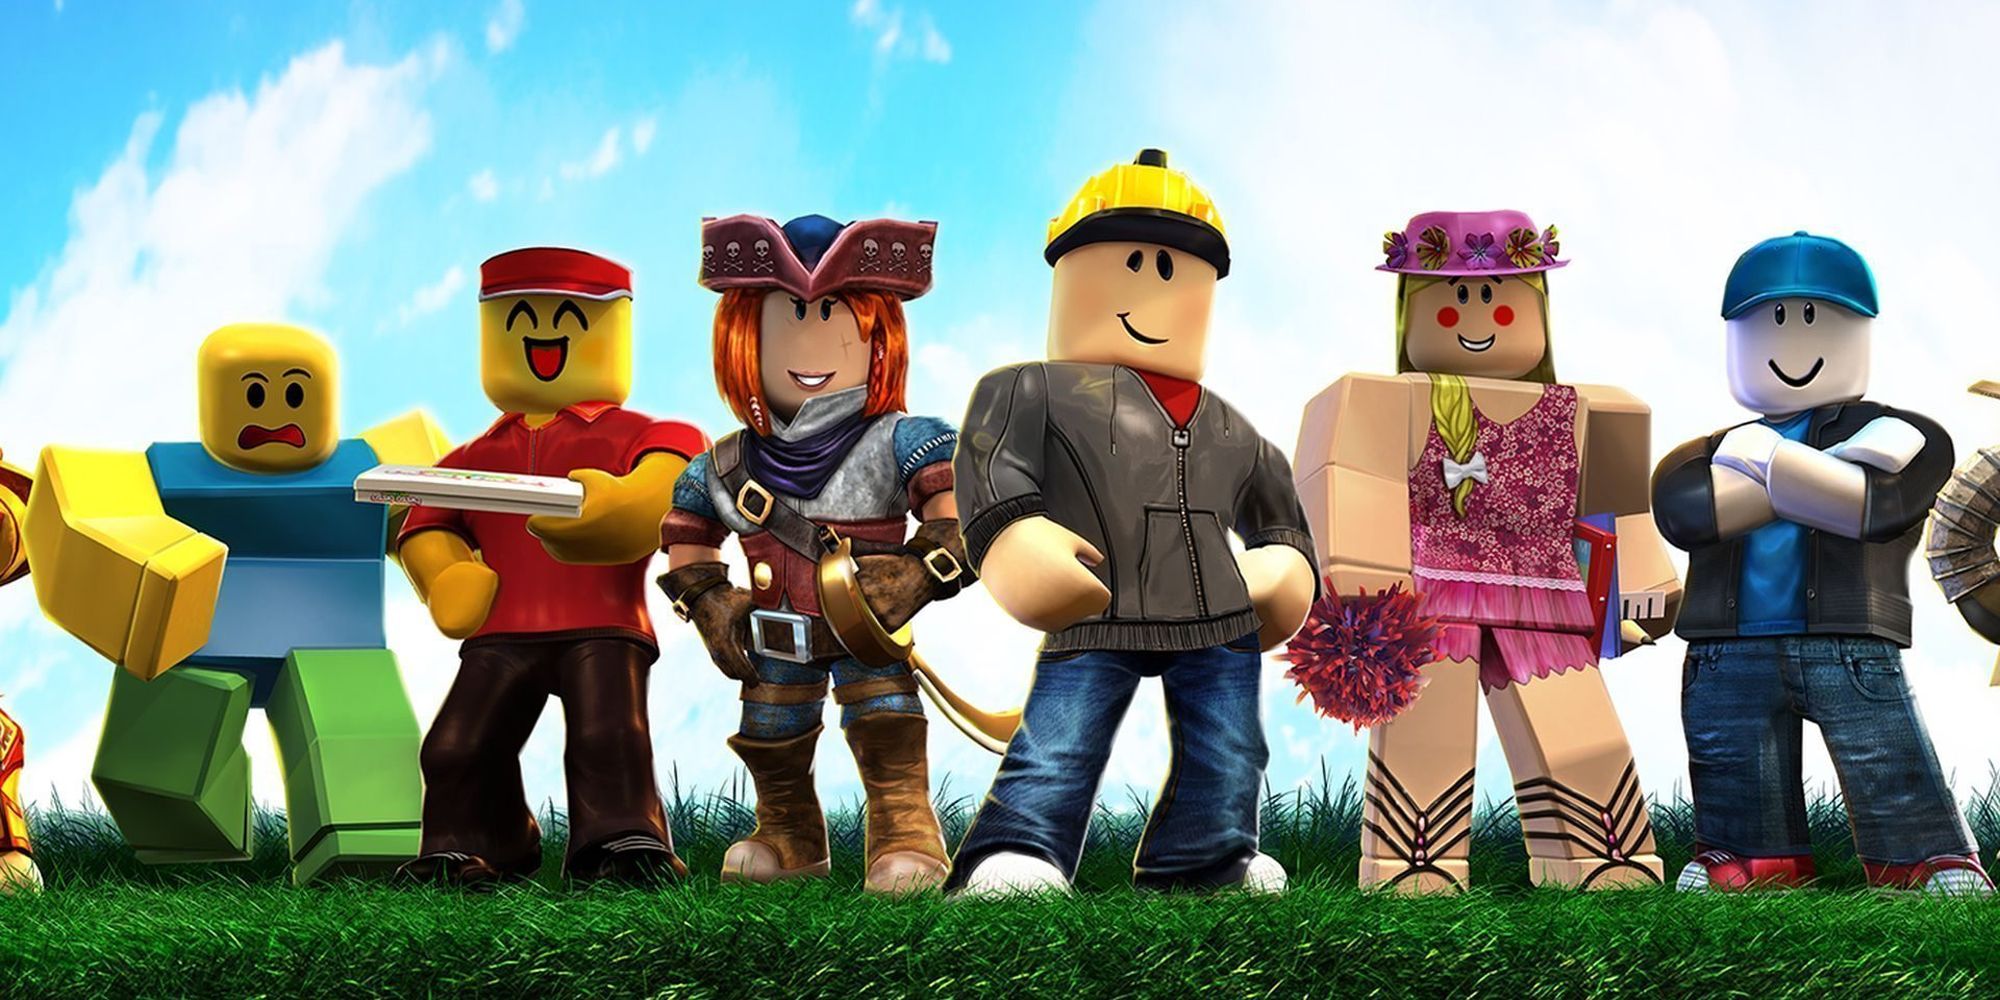 Roblox - #ThrowbackThursday ROBLOX celebrates its 10 year